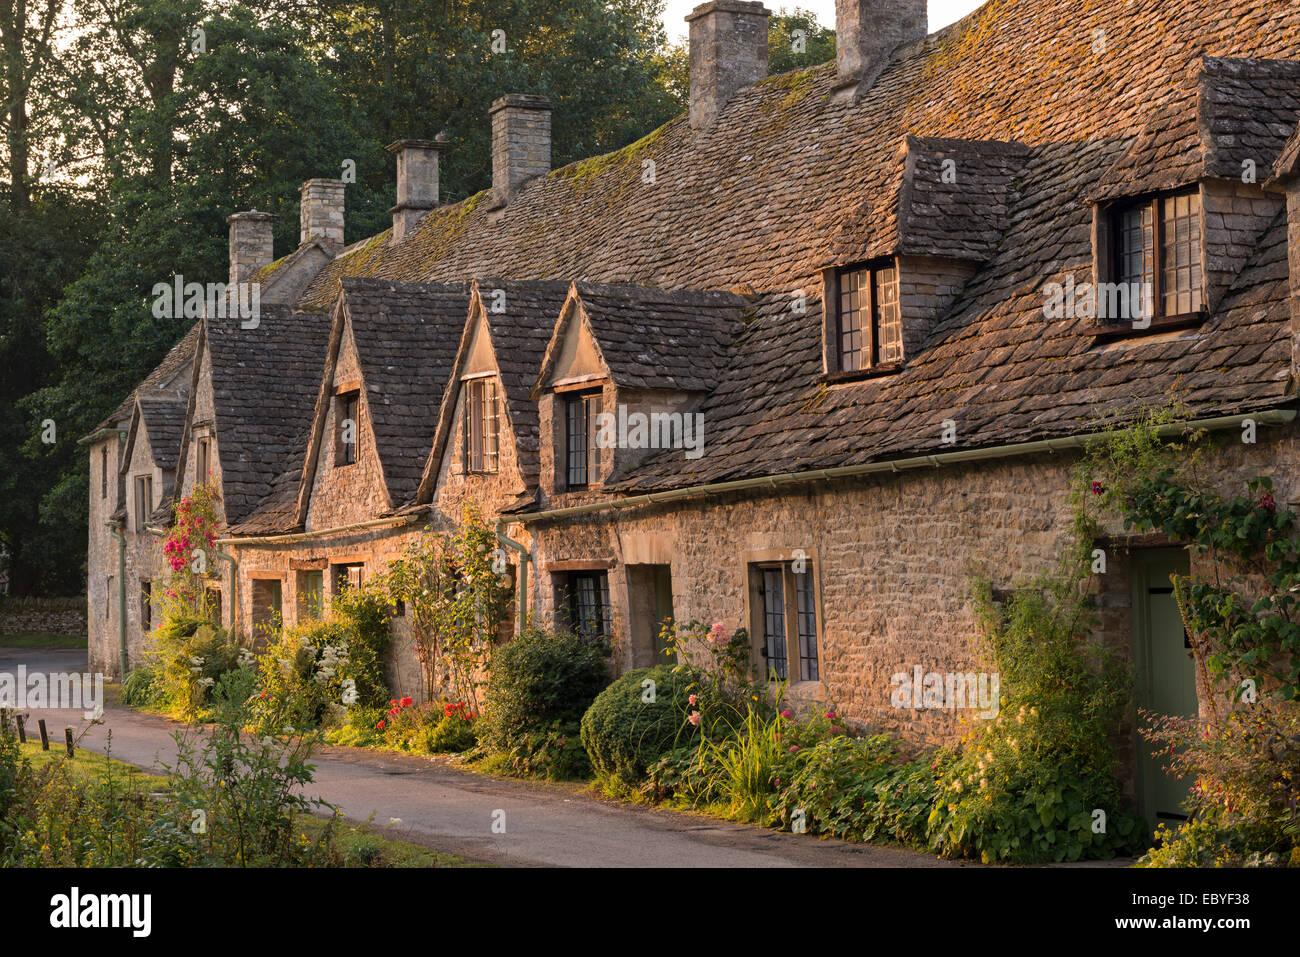 Picturesque cottages at Arlington Row in the Cotswolds village of Bibury, Gloucestershire, England. Summer (July) 2014. Stock Photo